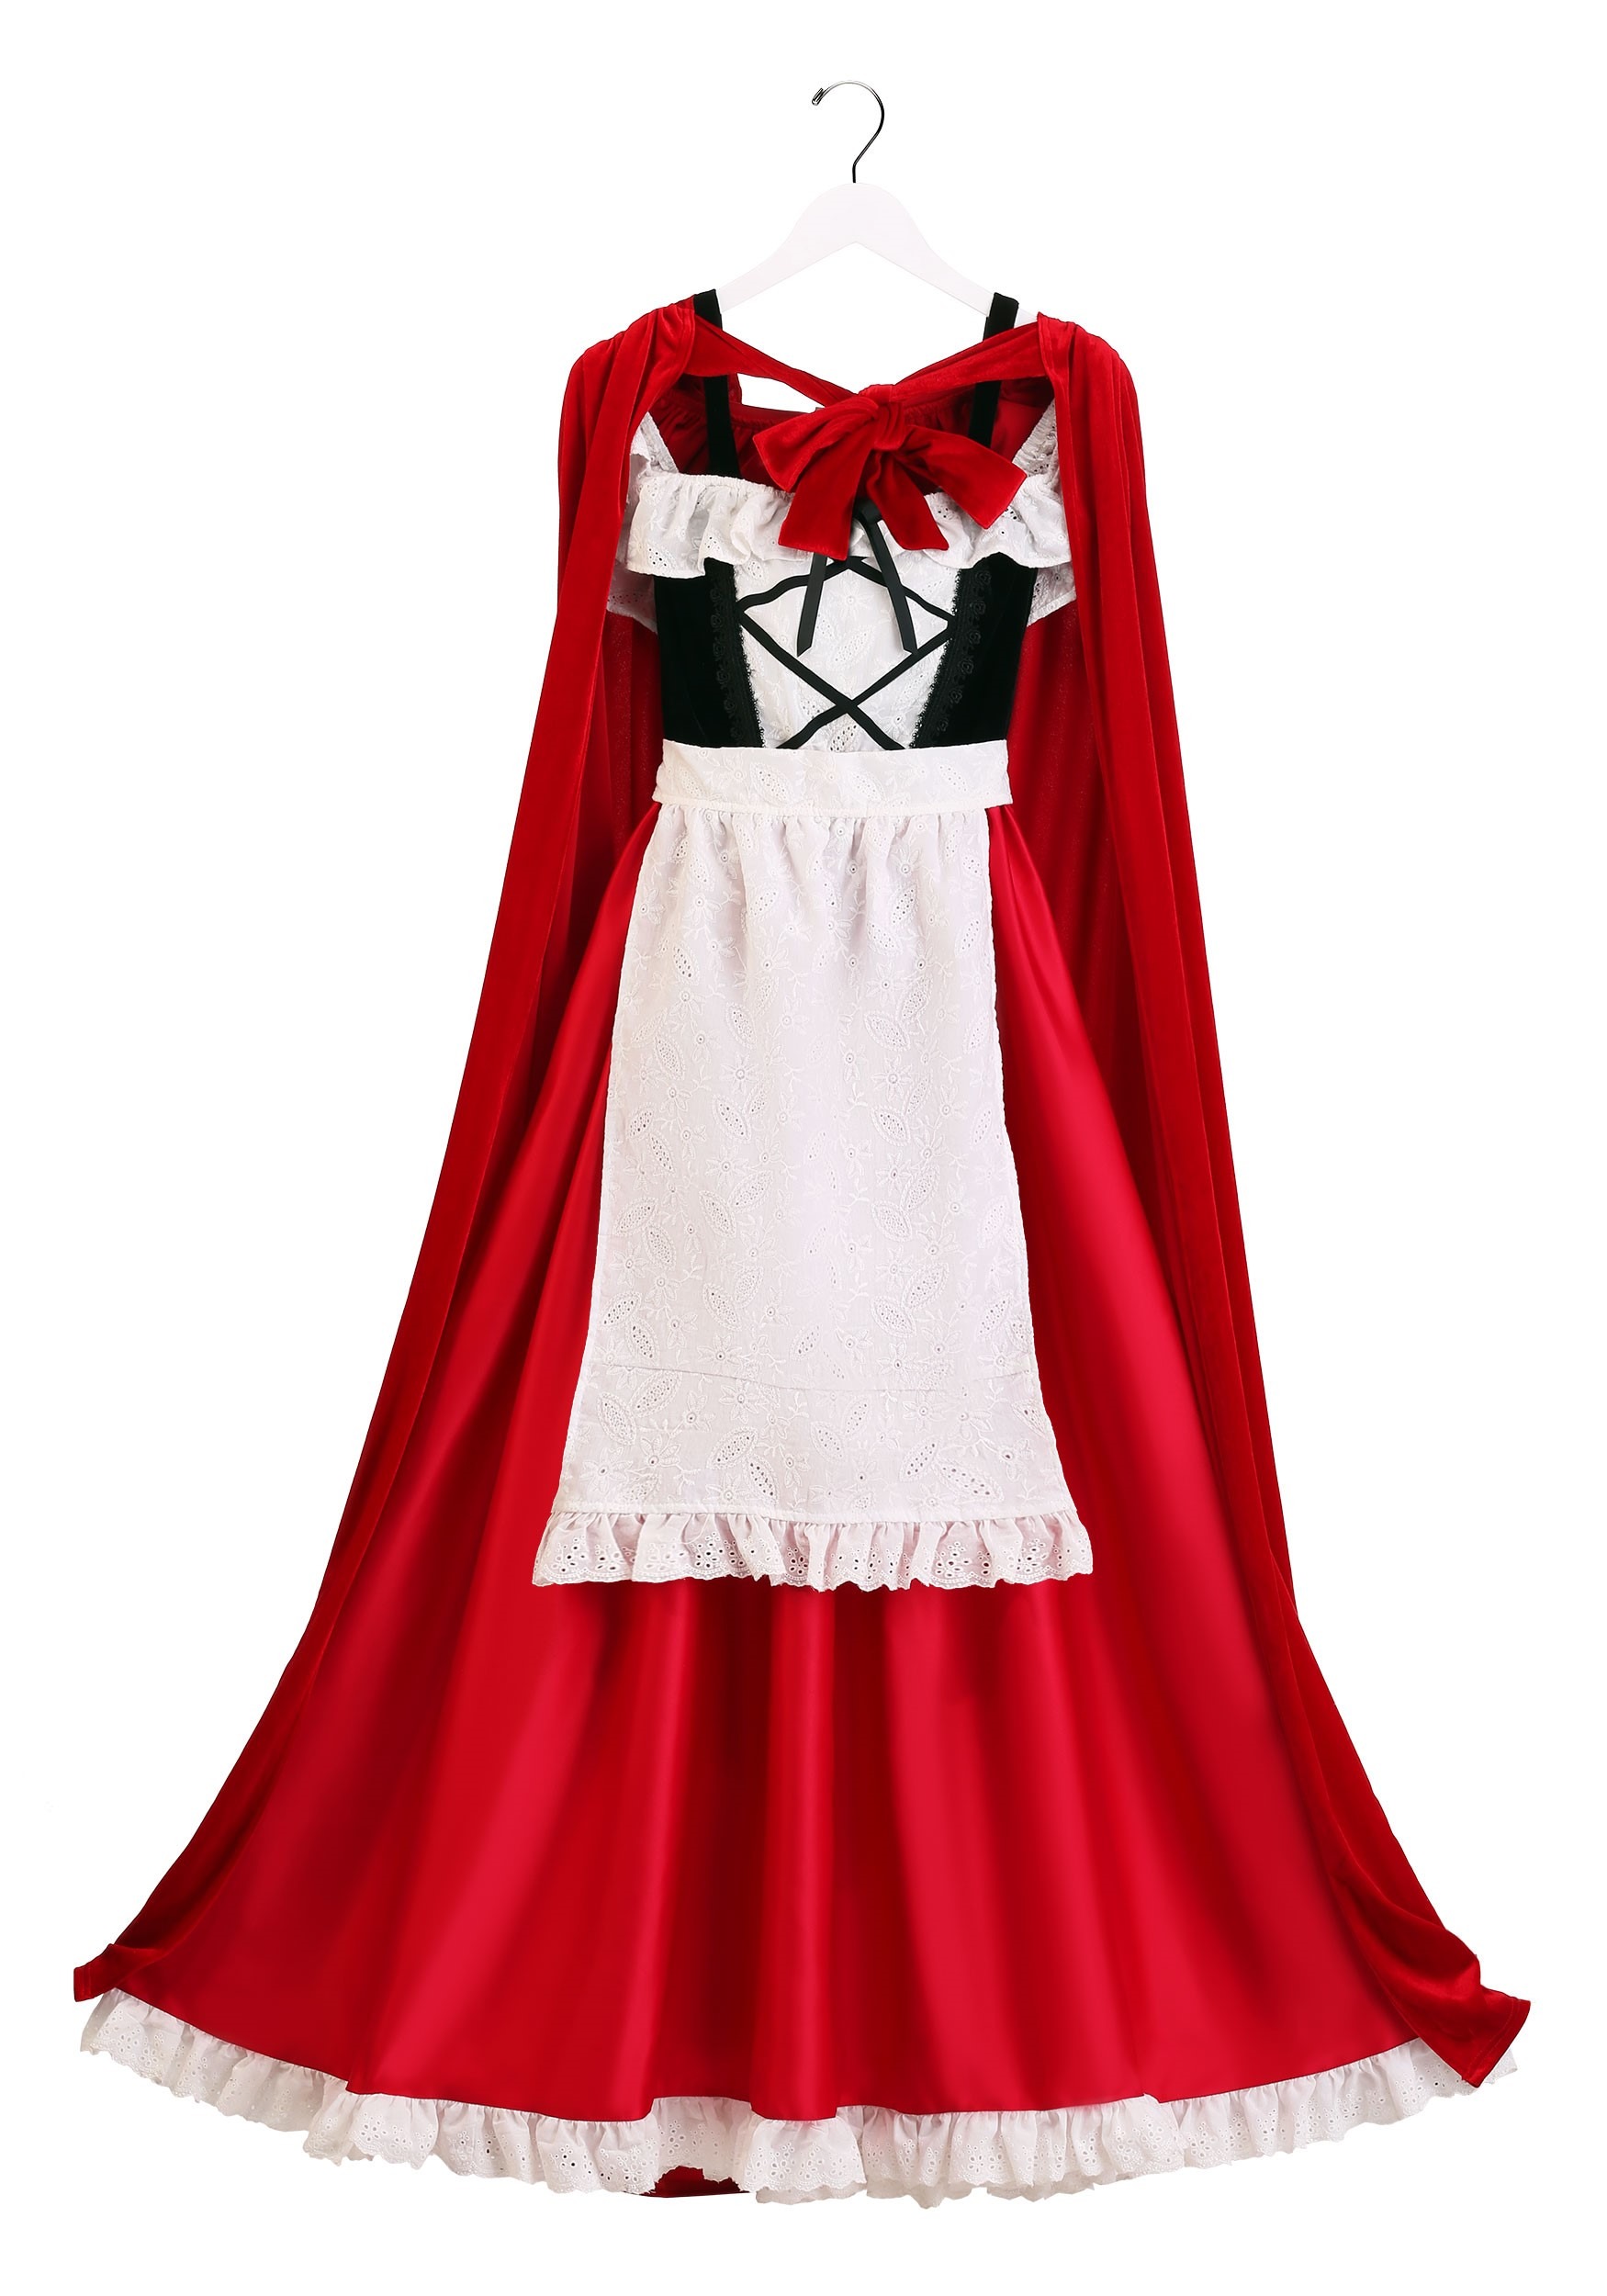 Plus Size Deluxe Red Riding Hood Costume